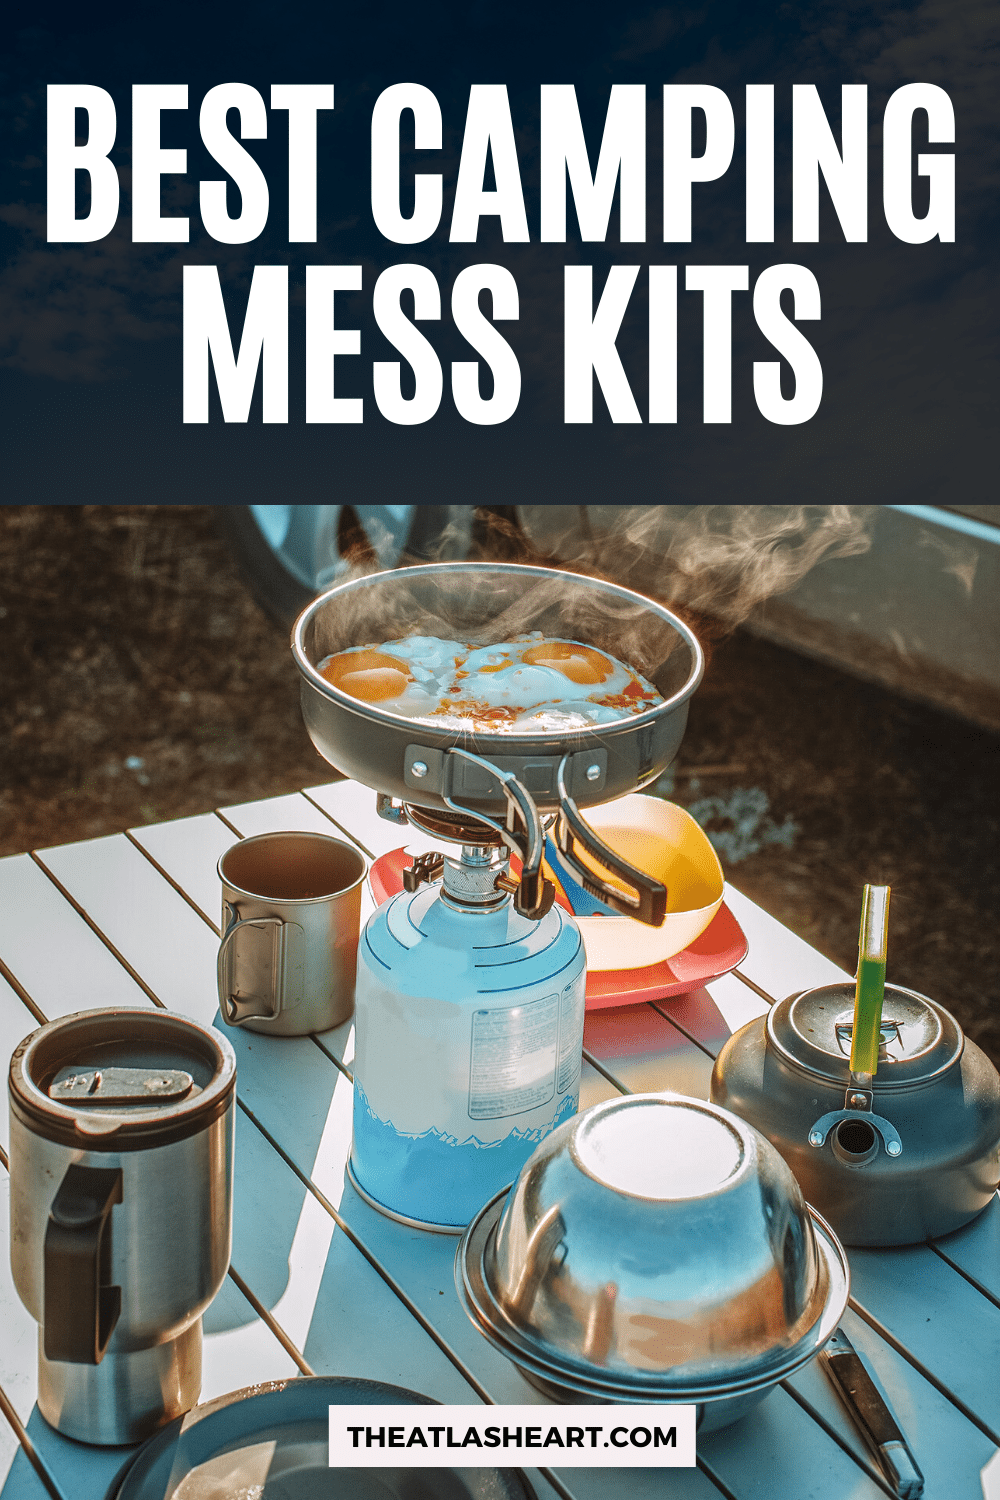 12 Best Camping Mess Kits for Your Next Trip in the Wild in 2023